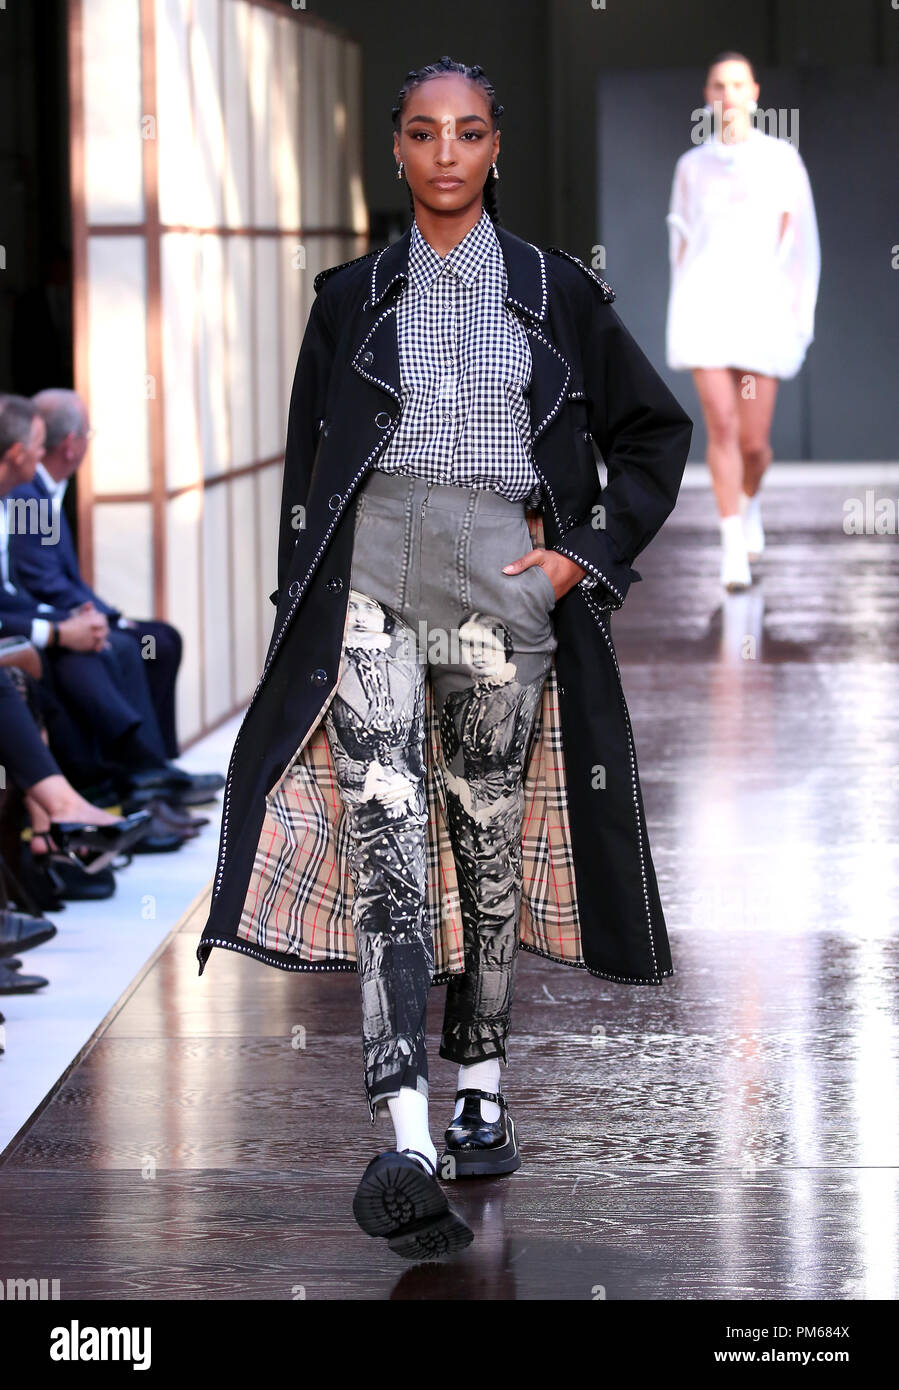 Model Jourdan Dunn on the catwalk during the Burberry London Fashion Week  SS19 show held at The South London Mail Centre Stock Photo - Alamy